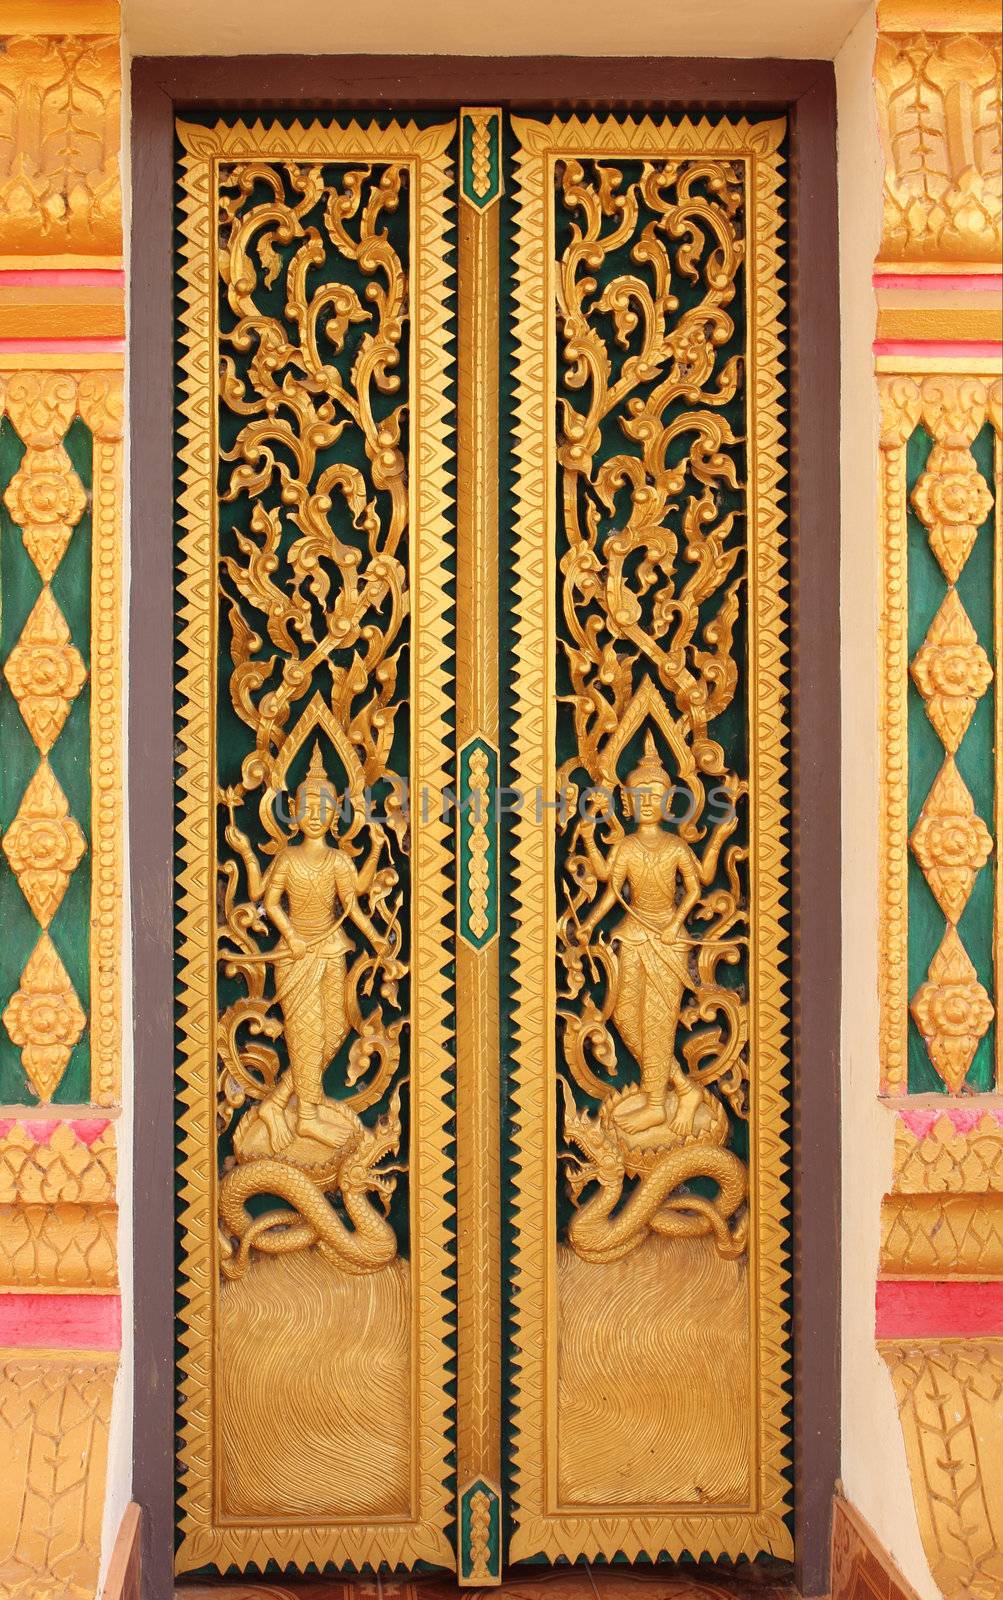 Buddhist temple door by olovedog